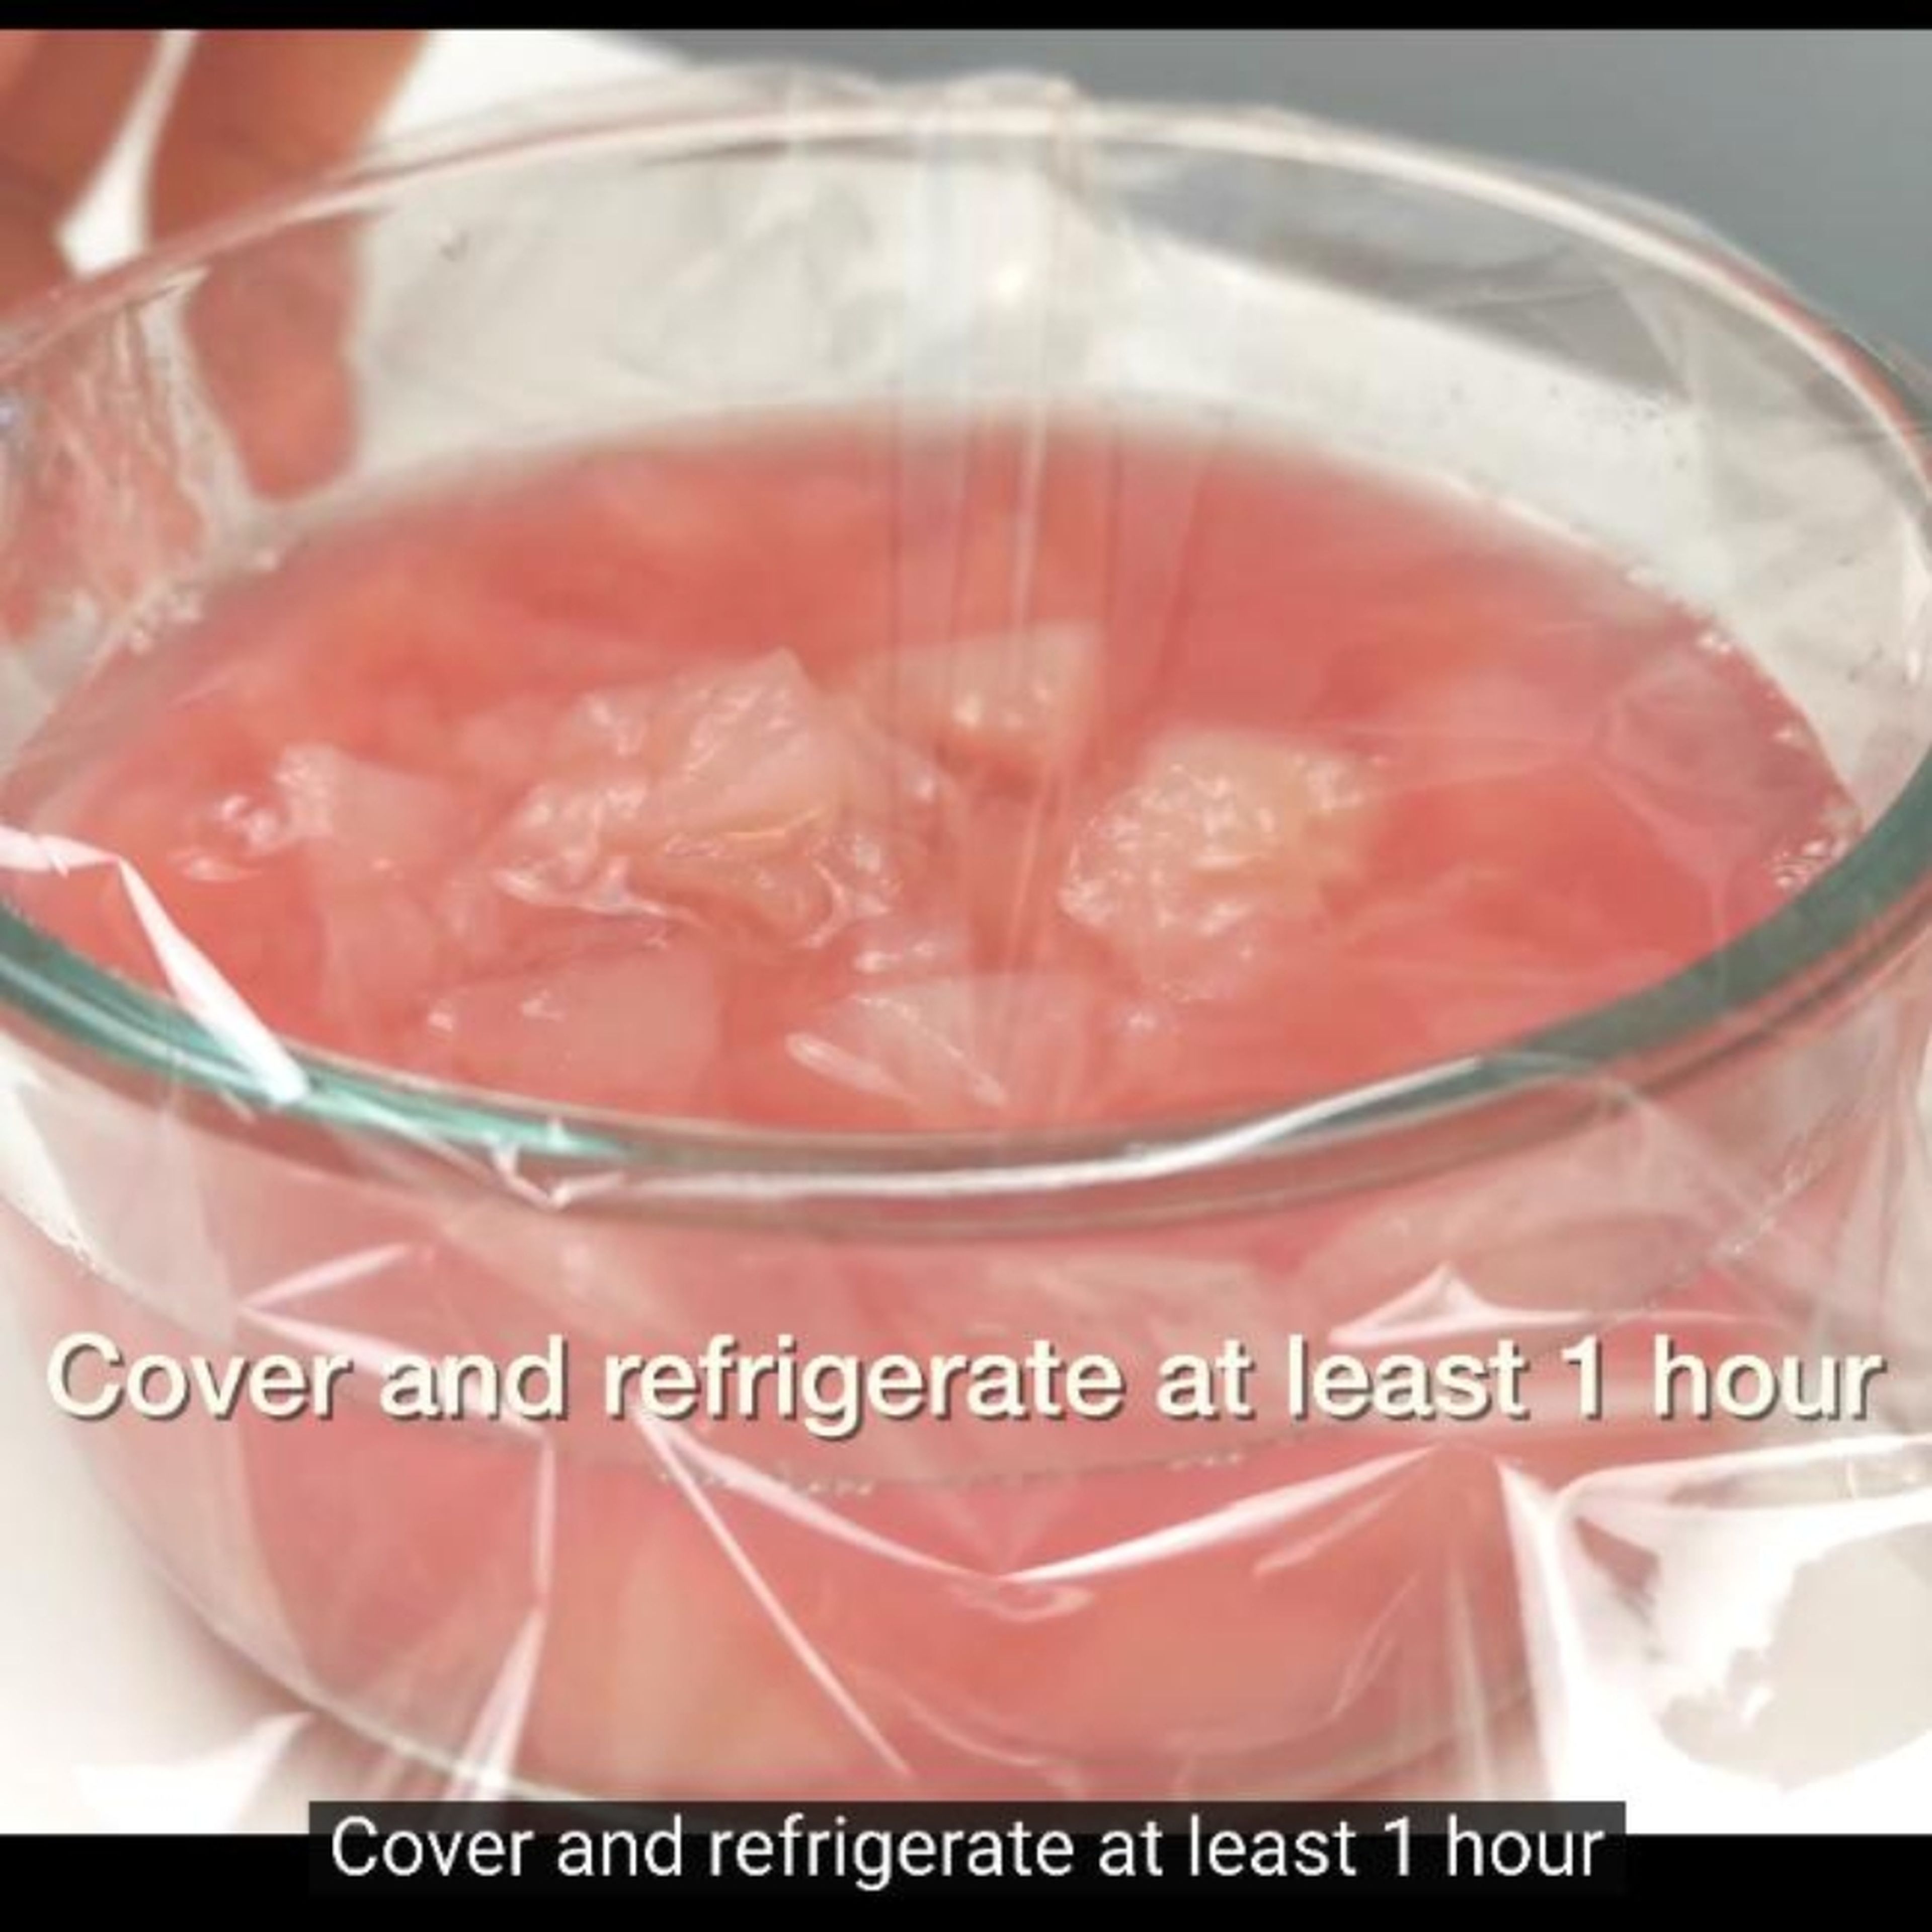 Cover and refrigerate the peach pulp for at least 1 hour